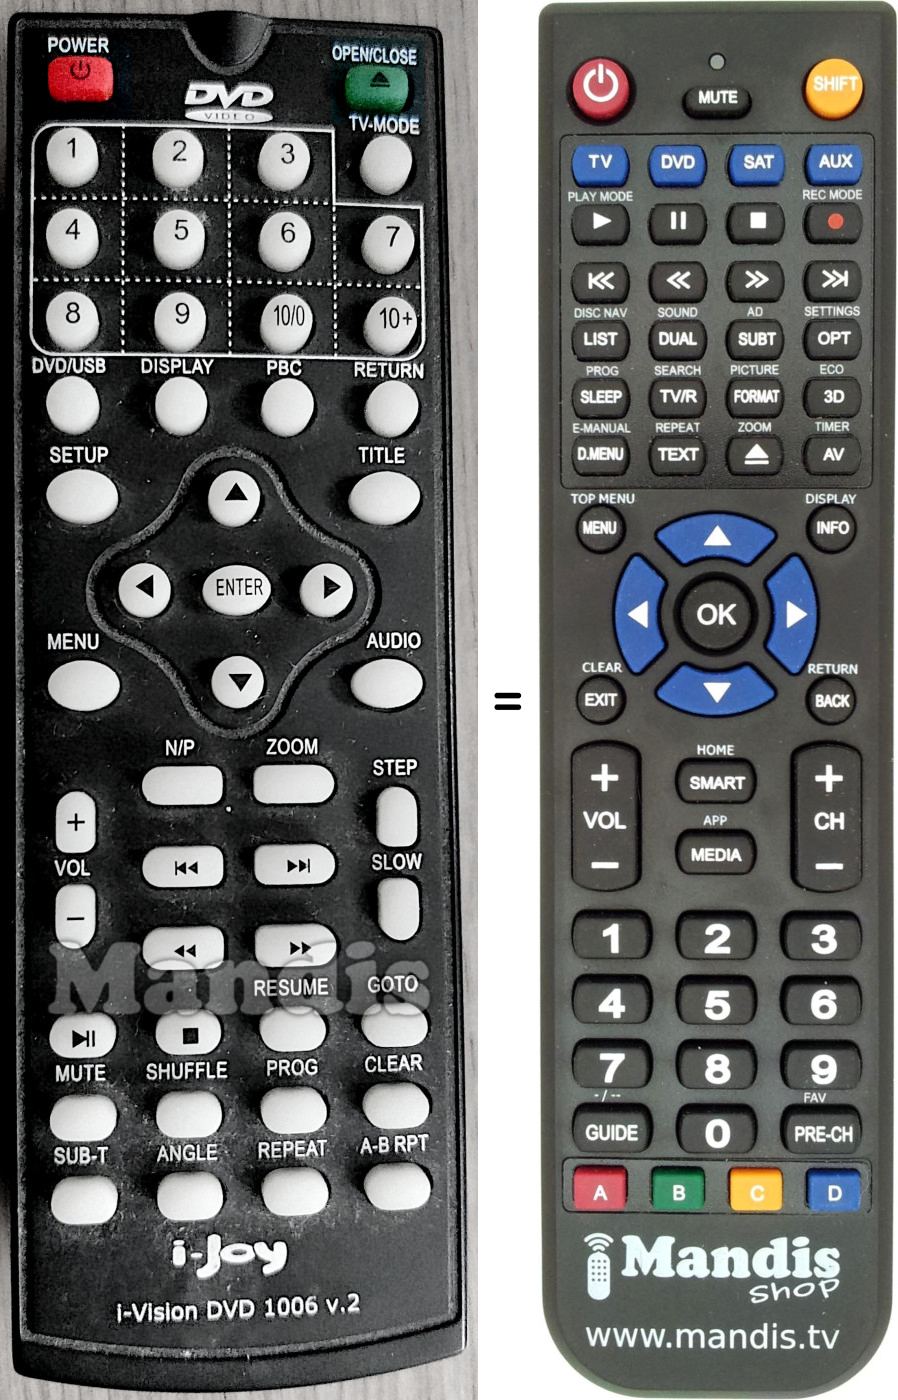 Replacement remote control i-Vision DVD 1006 V2